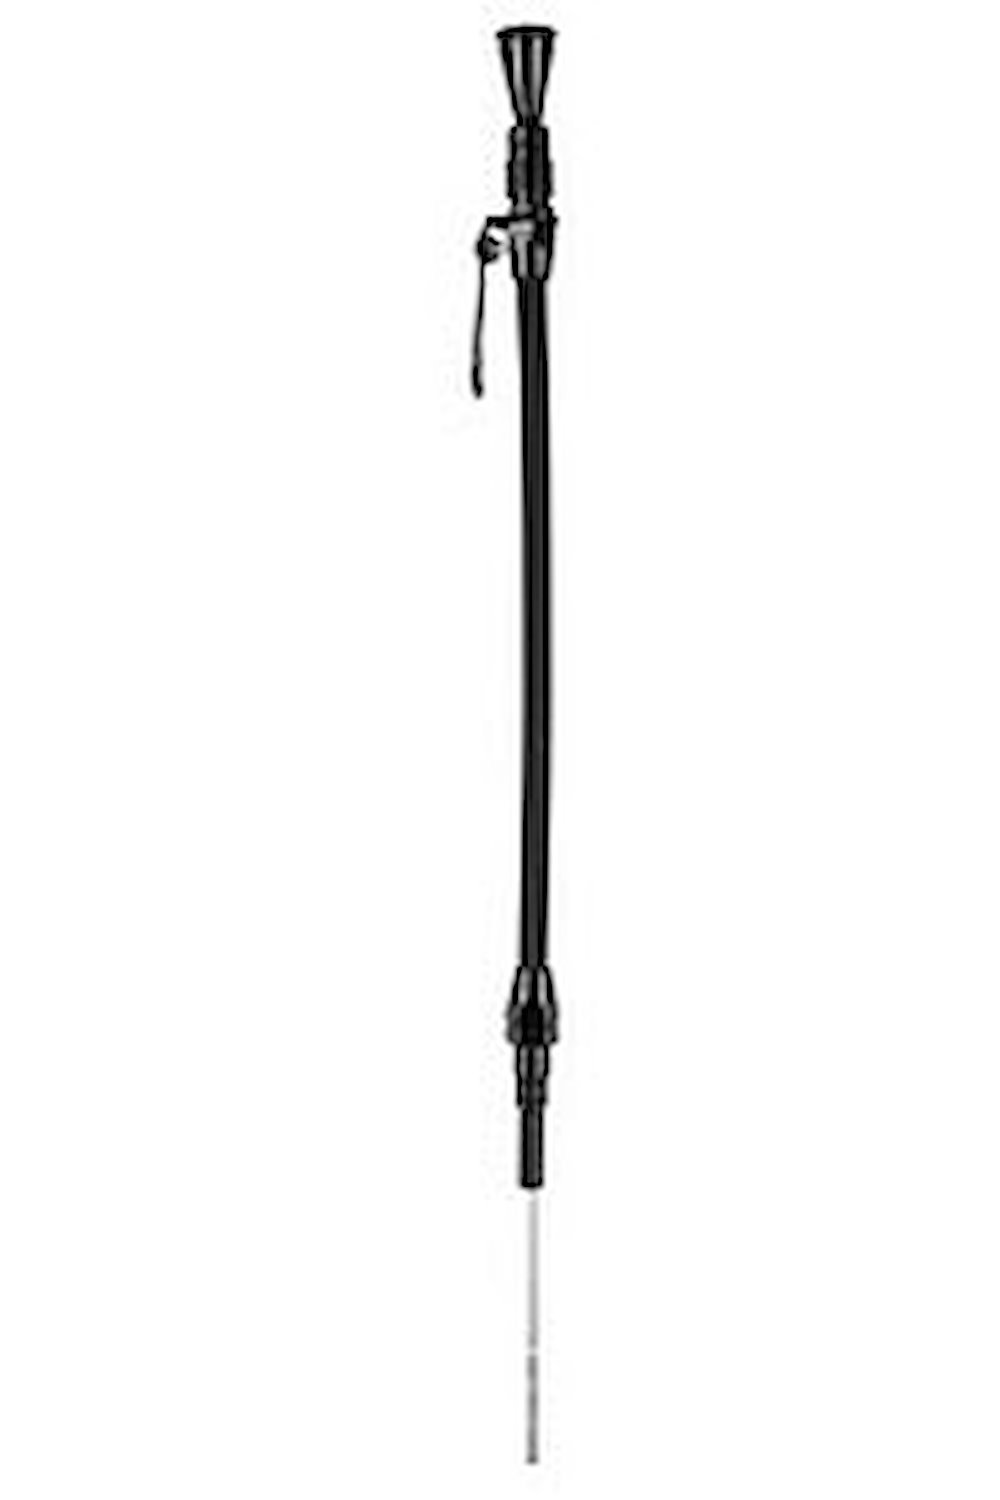 Anchor-Tight Locking Flexible Engine Dipstick Ford FE 332-428